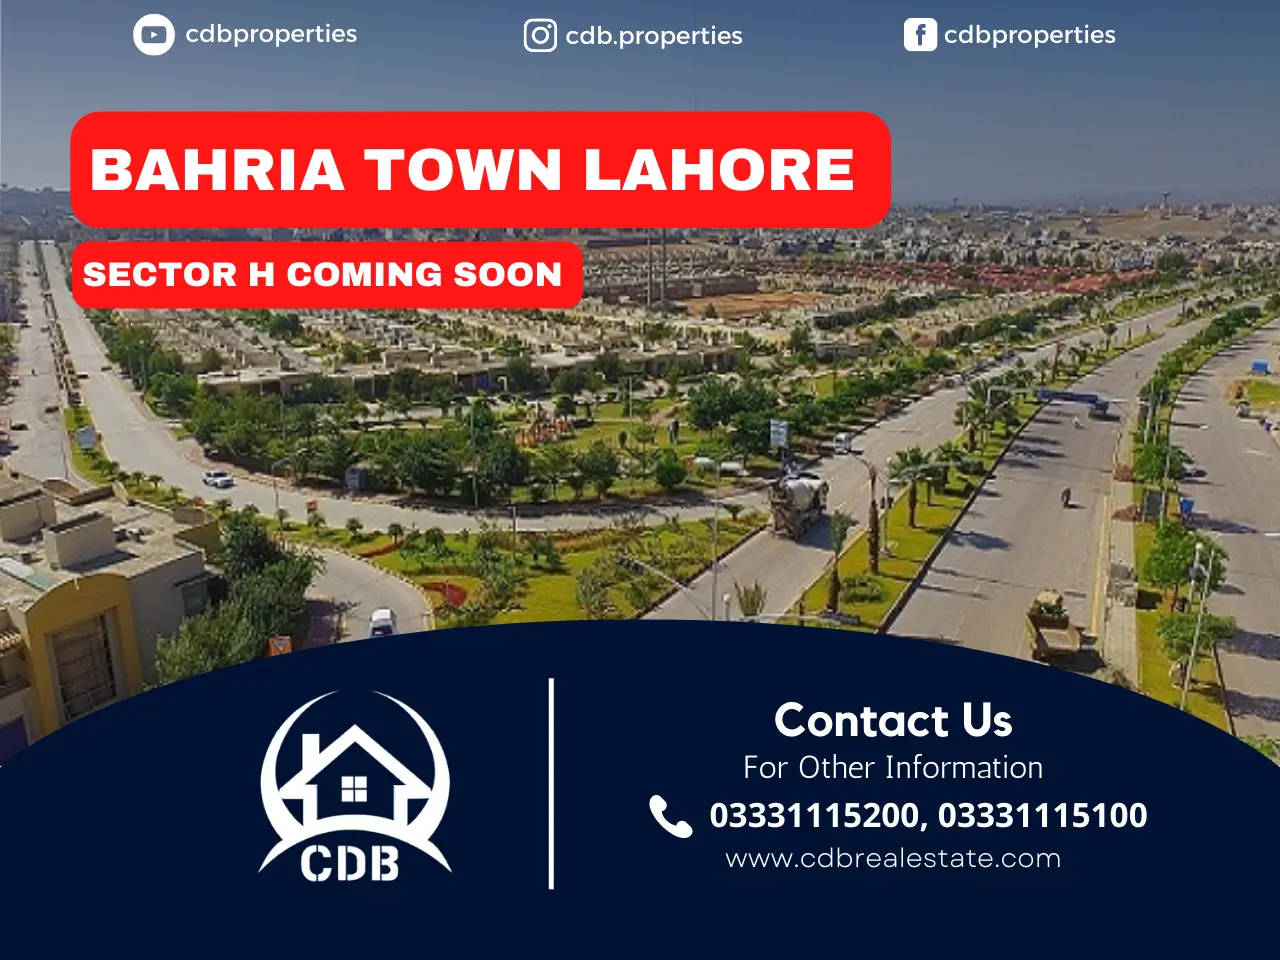 drone view of bahria town roads